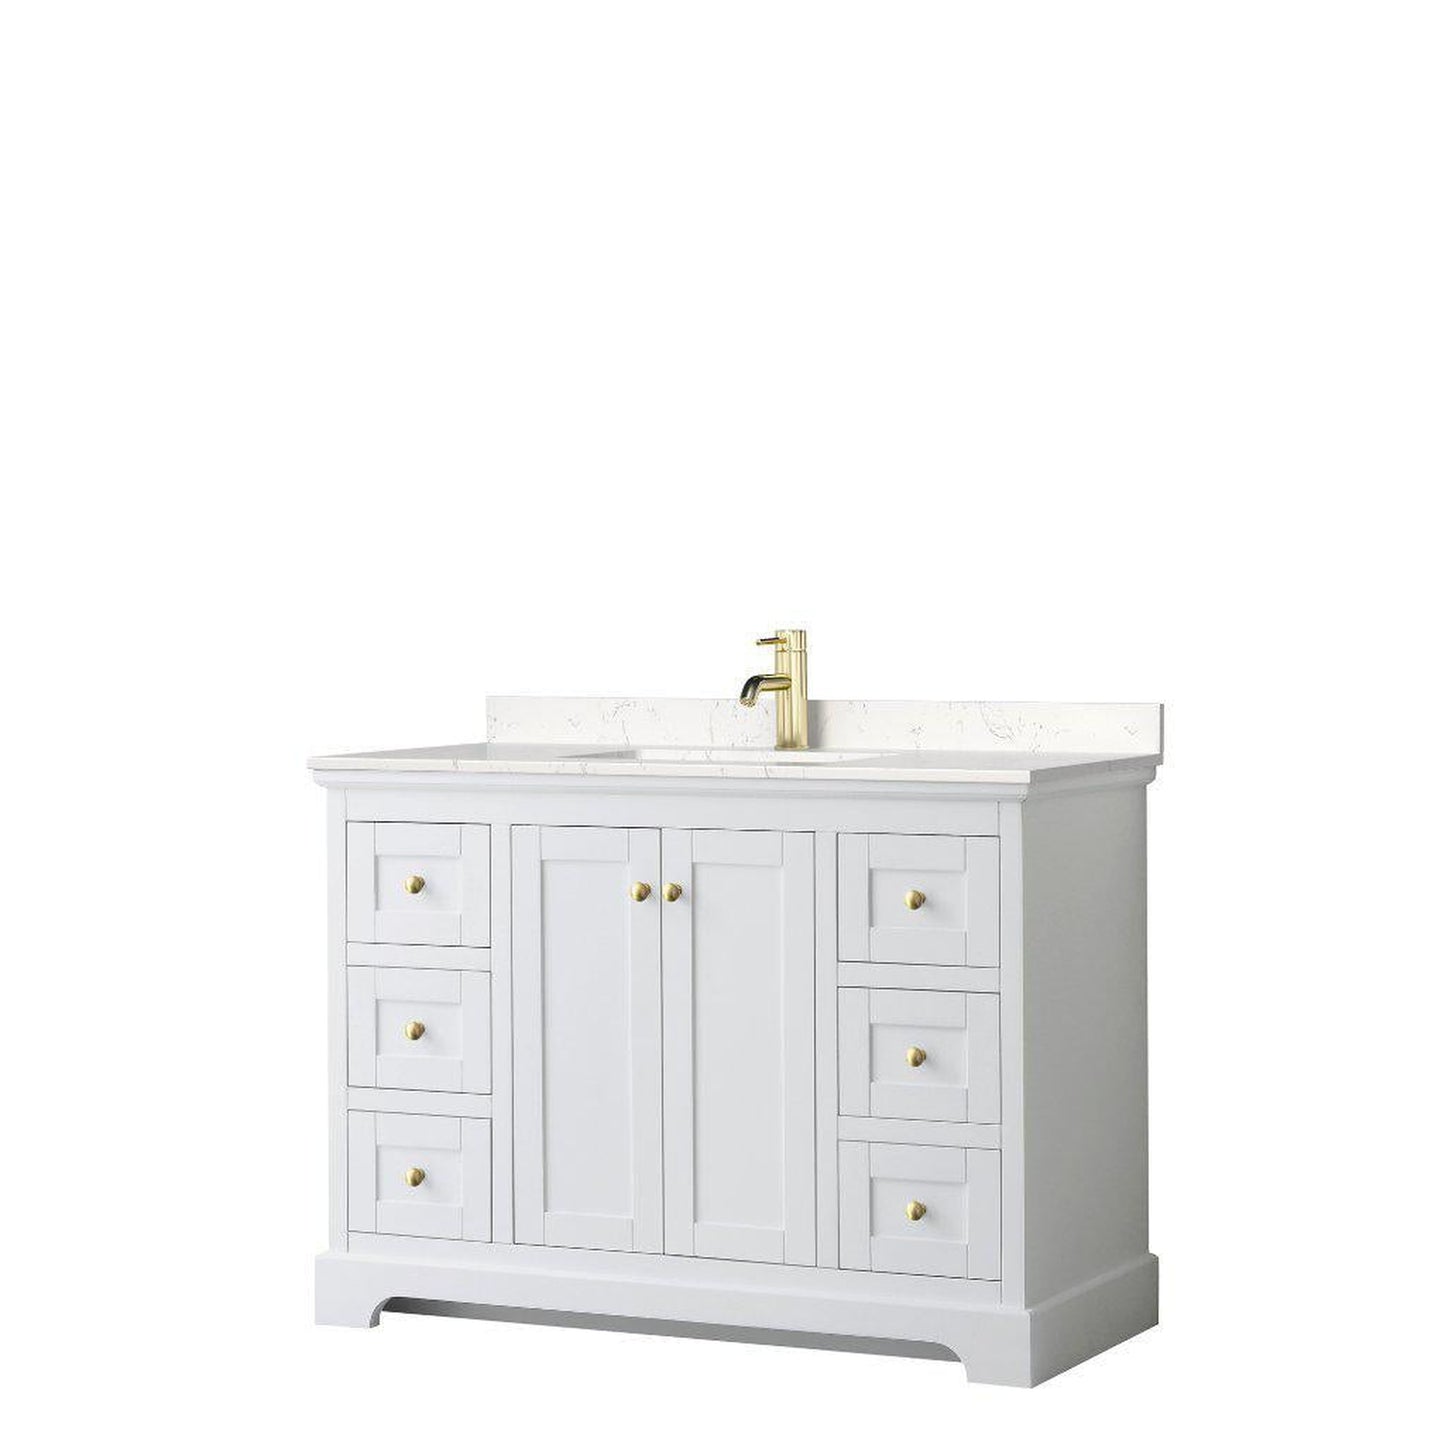 Wyndham Collection Avery 48" White Single Bathroom Vanity, Light-Vein Carrara Cultured Marble Countertop With 1-Hole Faucet, Square Sink, Gold Trims